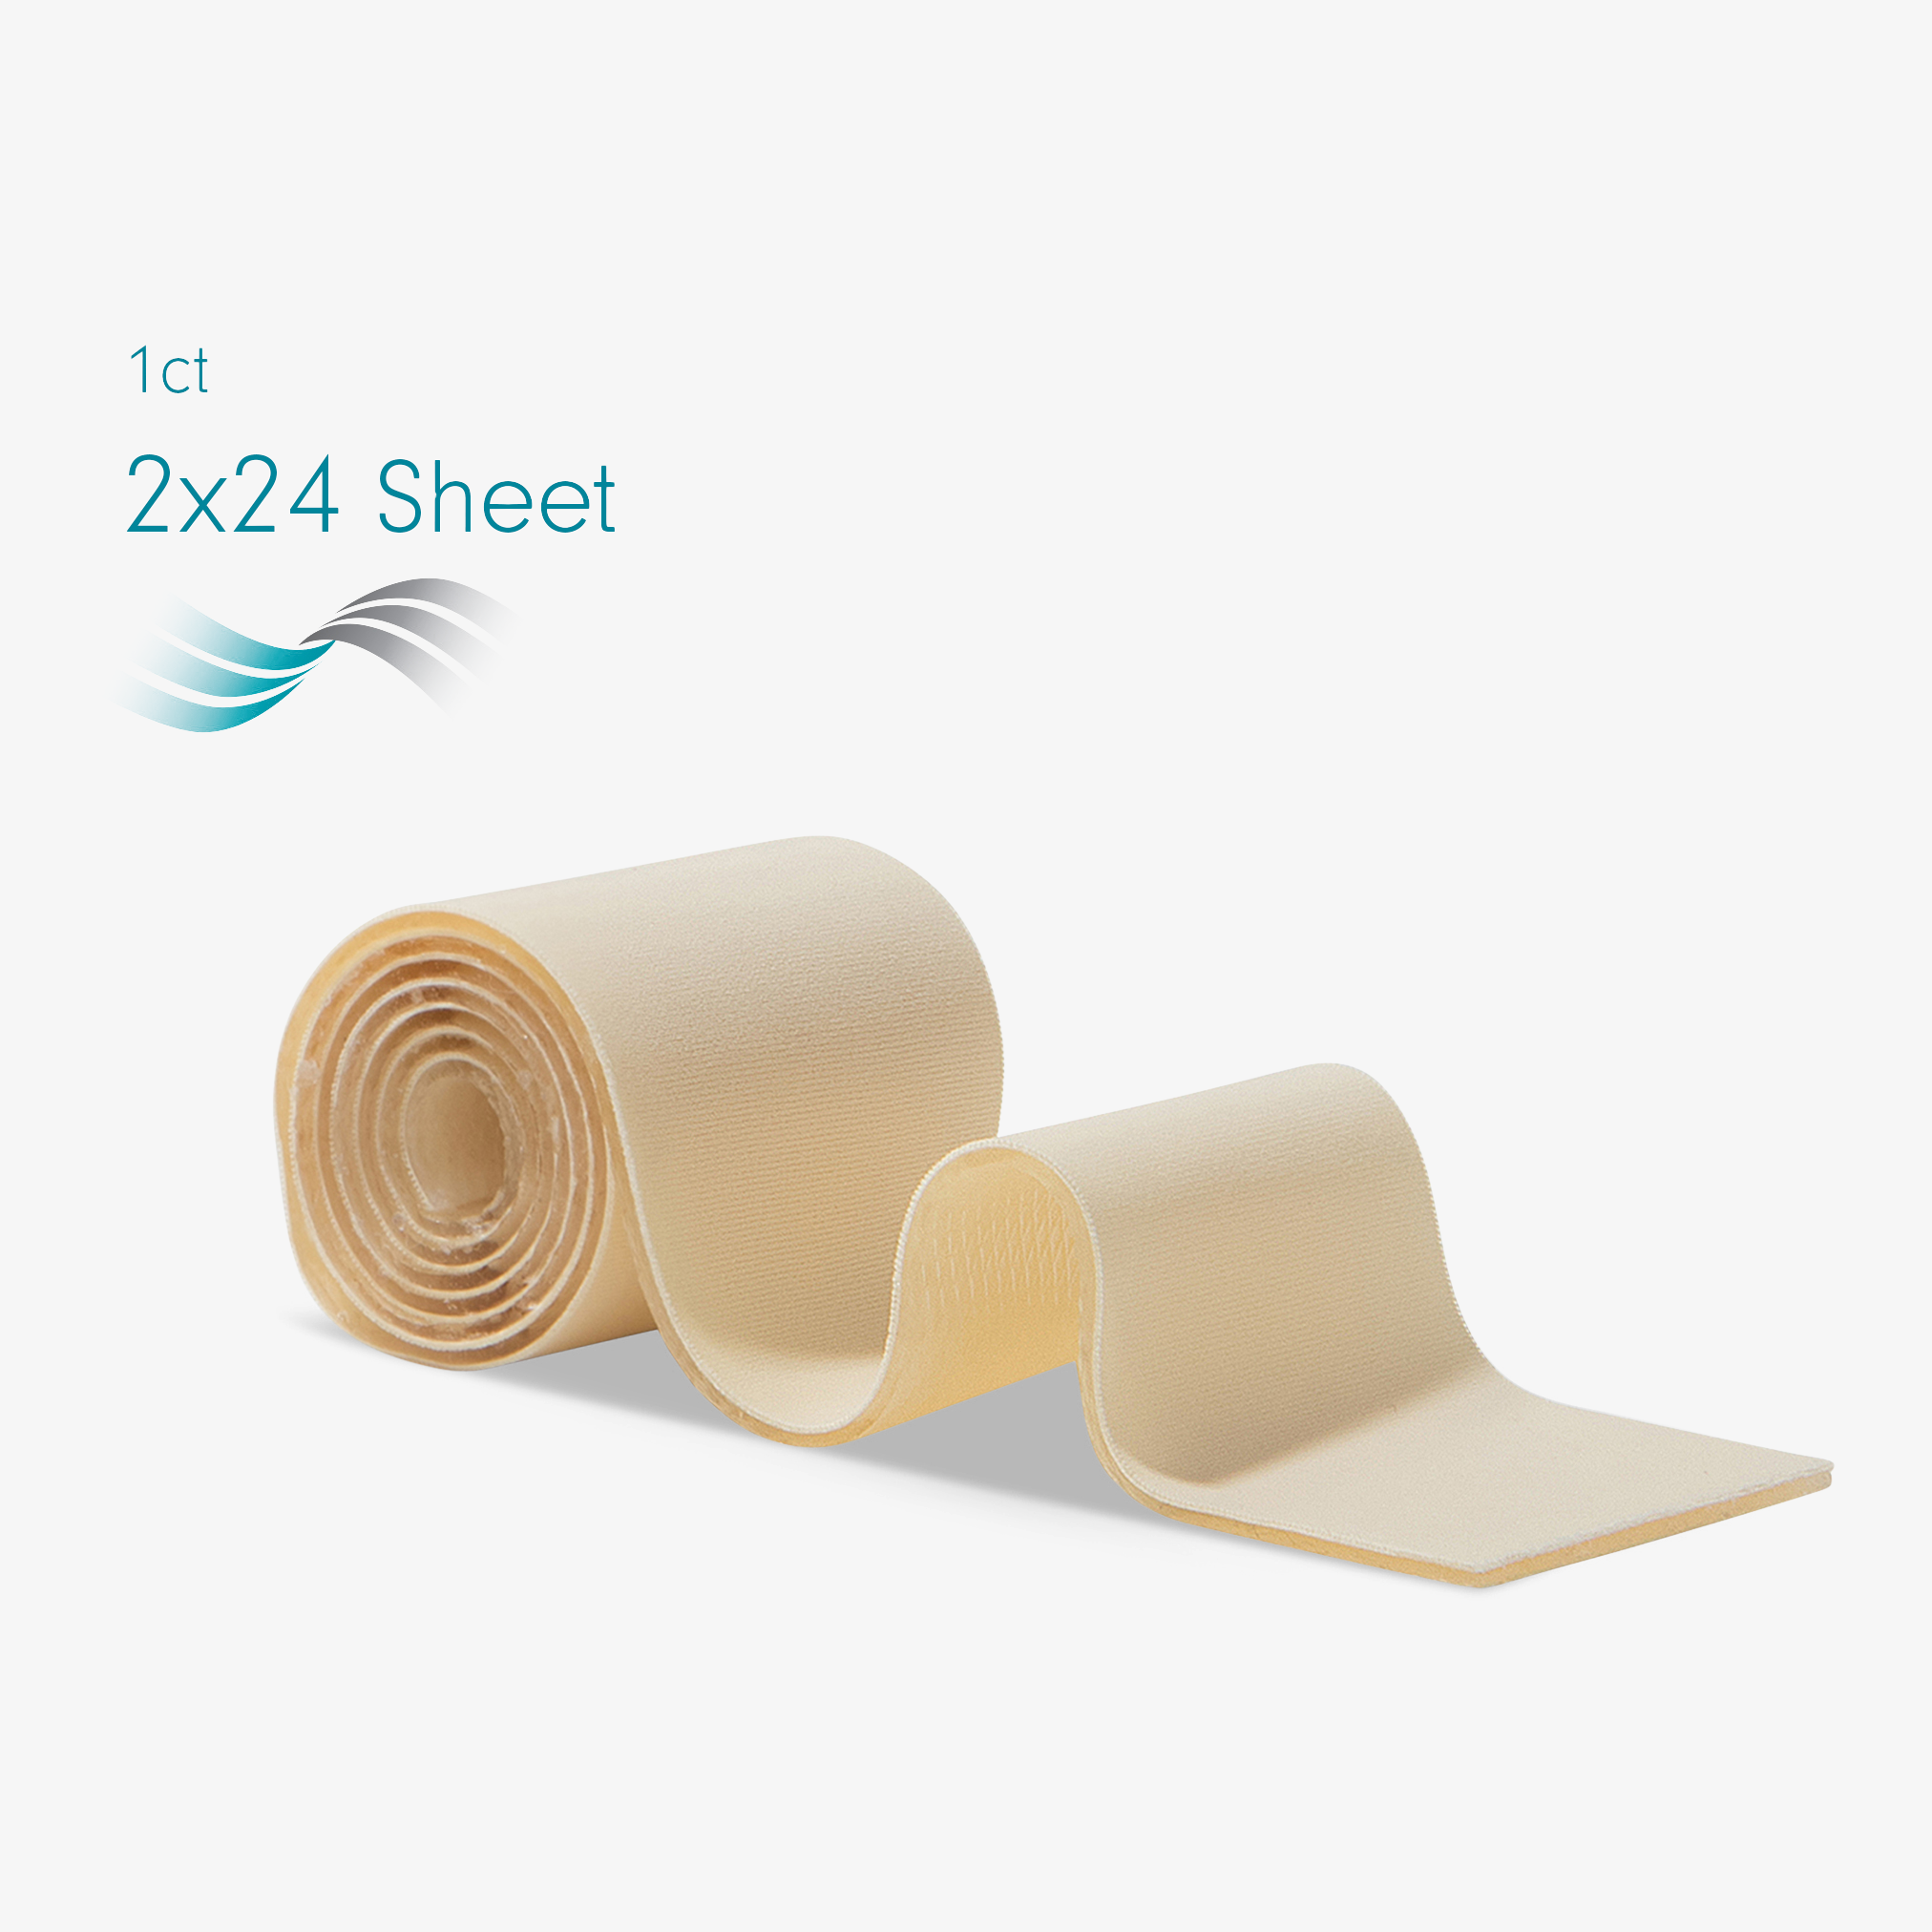  Advanced Medical-Grade Silicone 2" x 24" Roll 1 count| beige